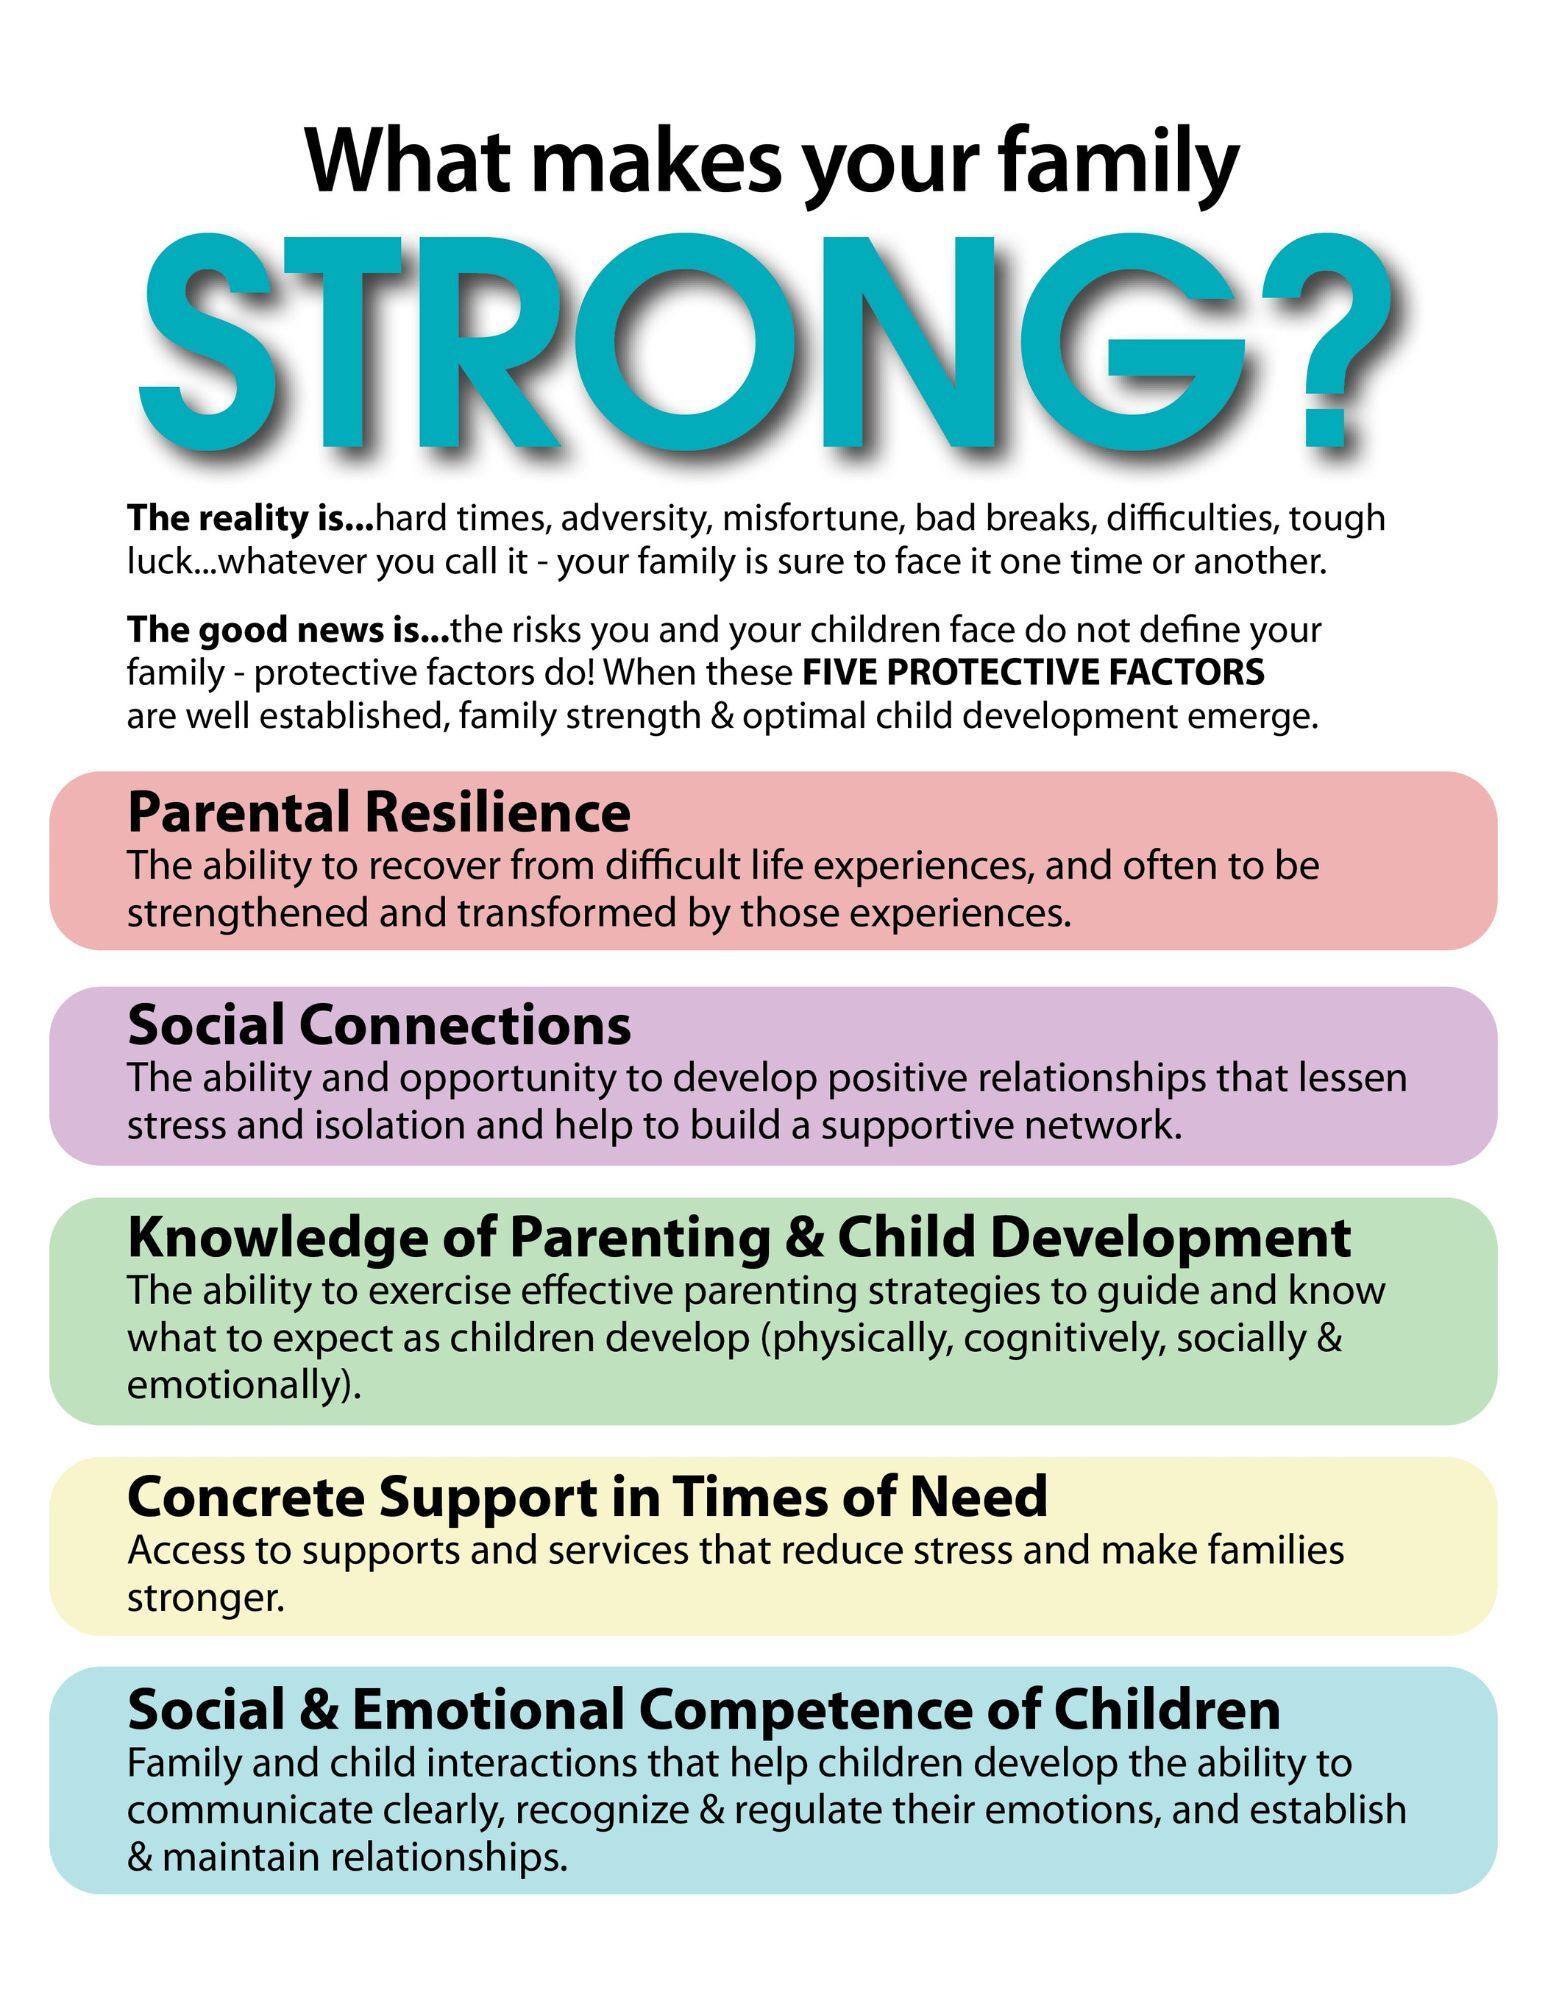 What makes your family strong? Parental Resilience, Social Connections, Knowledge of Parenting and Child Development, Concrete Supports in Times of Need, Social and Emotional Competence of Children